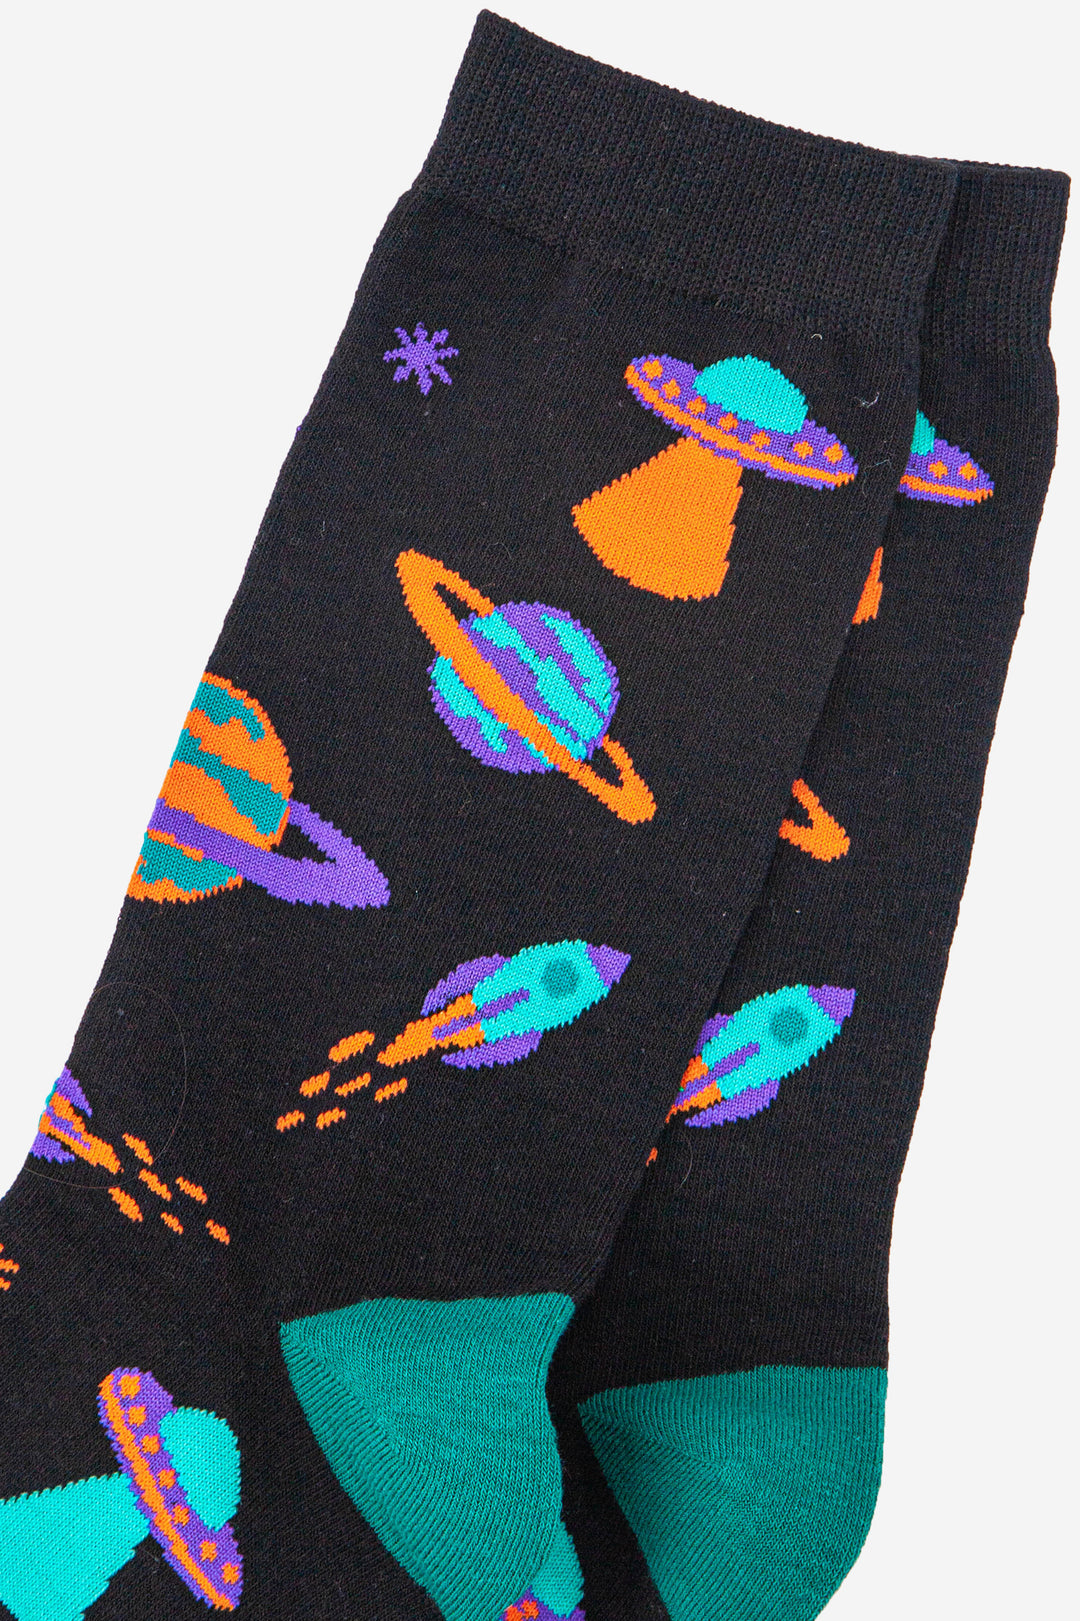 close up of the retro space design showing the rockets, spaceships and planets which are all in orange, blue and purple